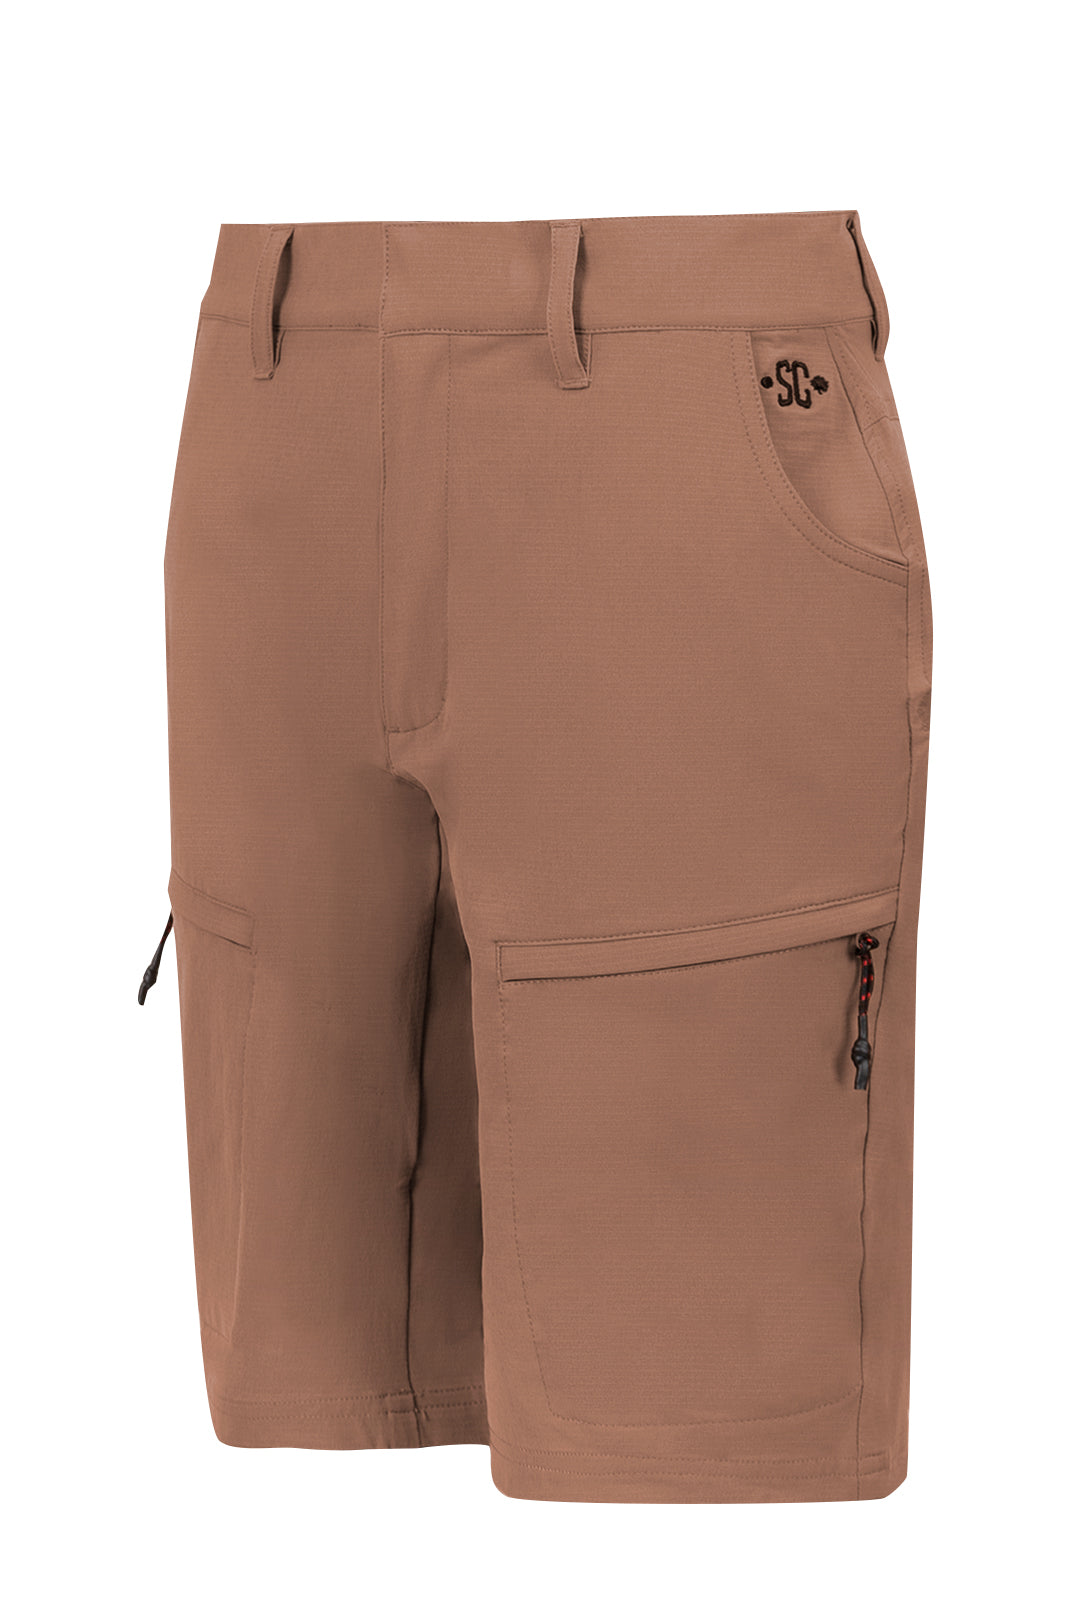 "Lily" fishing shorts for women